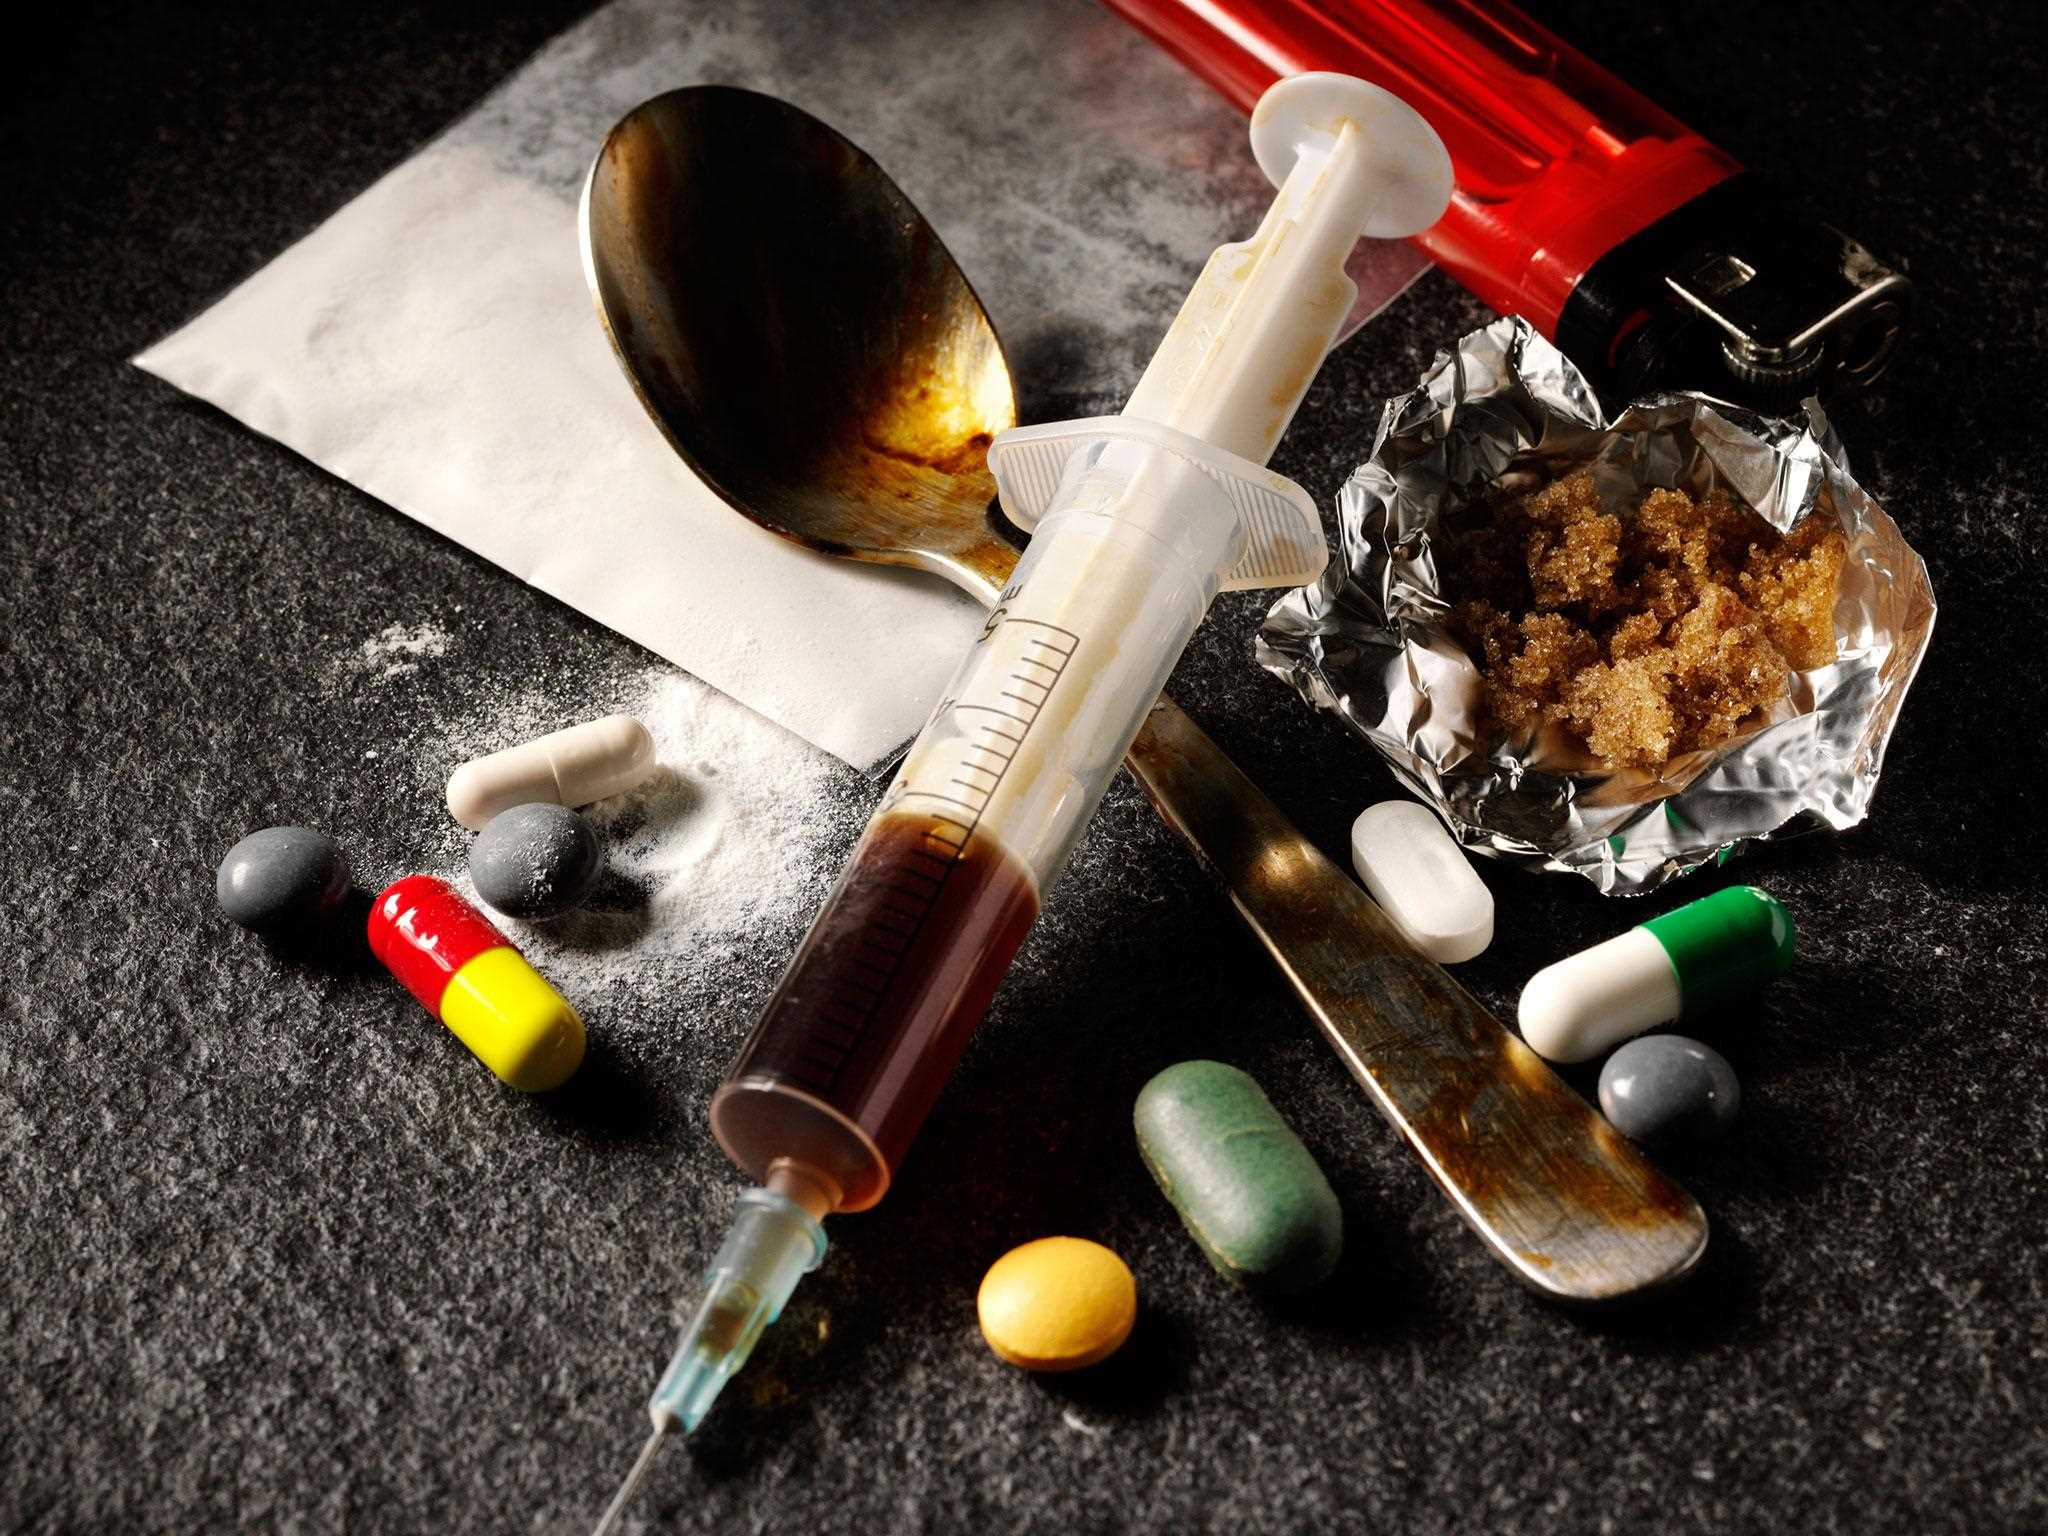 Two-thirds of patients start substance abuse in age group of 11-20 years: IMHANS Study